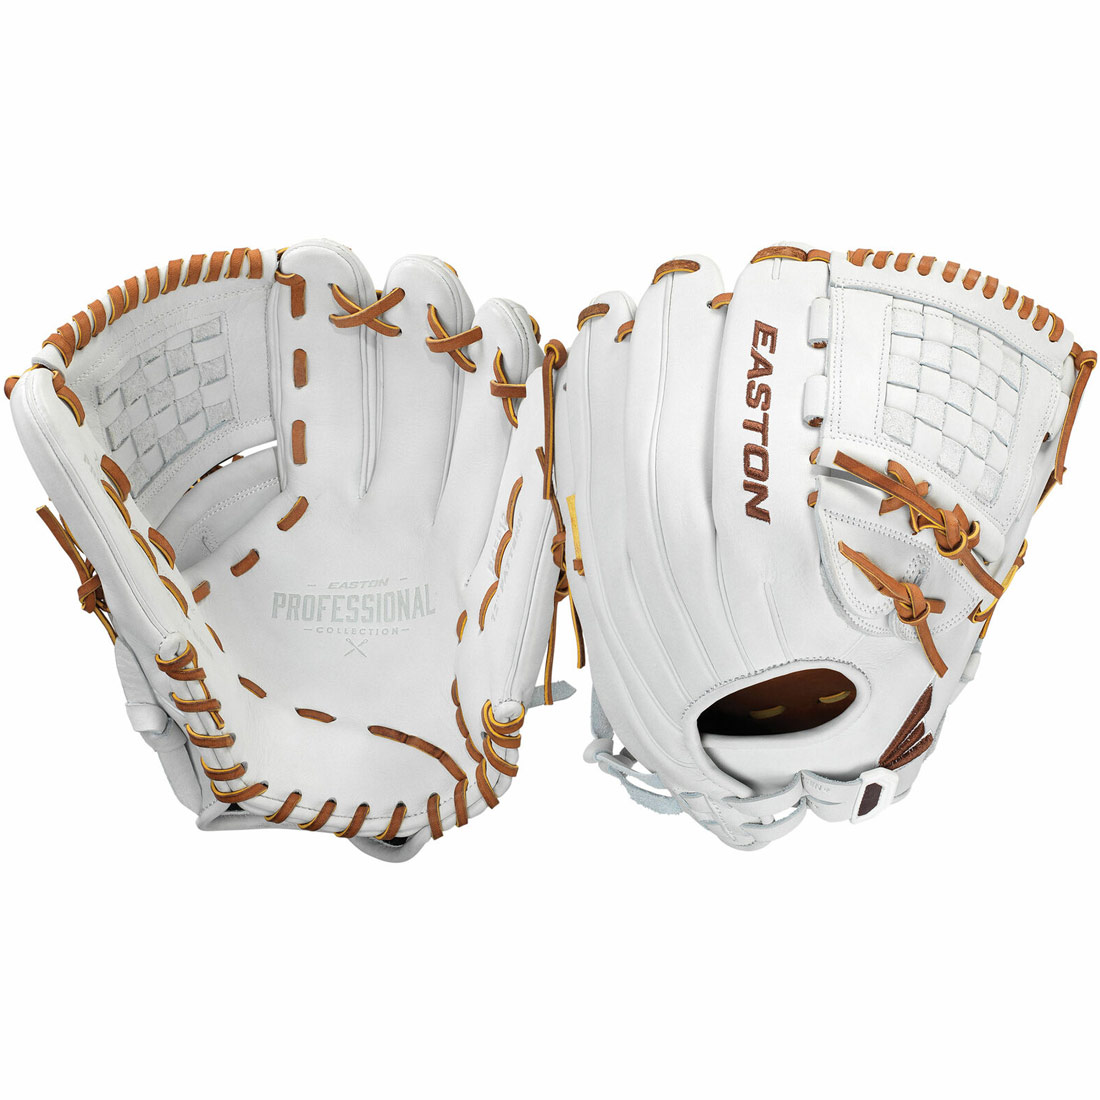 Easton Pro Collection Fastpitch Softball Glove 12\" PCFP12